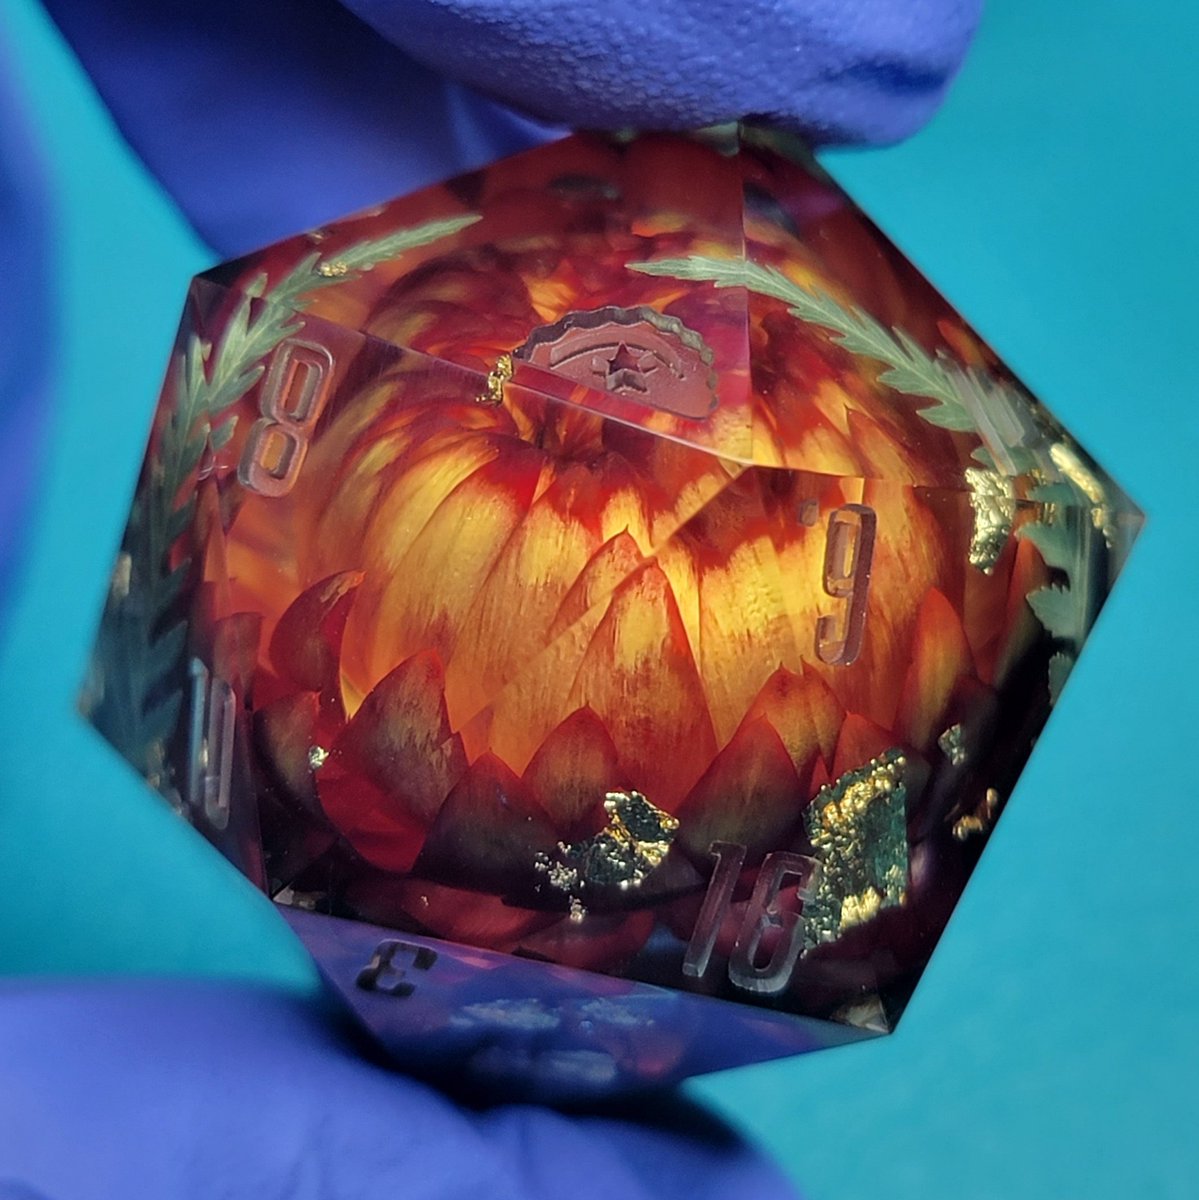 Hot damn 👁👄👁 this flaming hot D20 is fresh out of the mold 🥵🔥